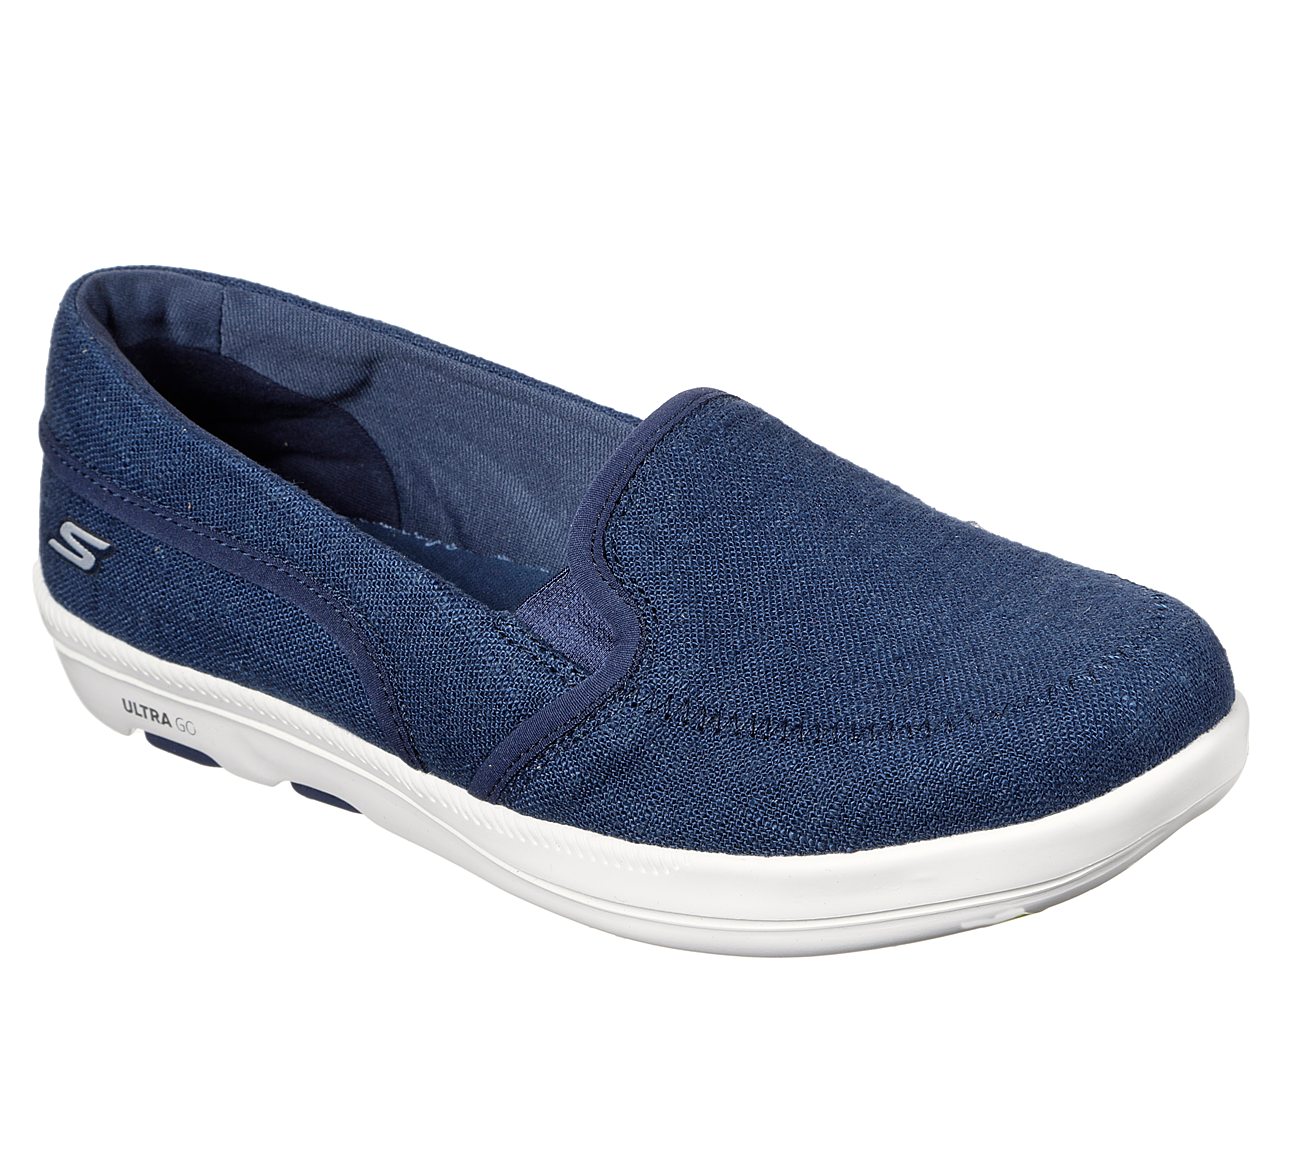 SKECHERS ON THE GO BLISS - EASYGOING [136115NVY]